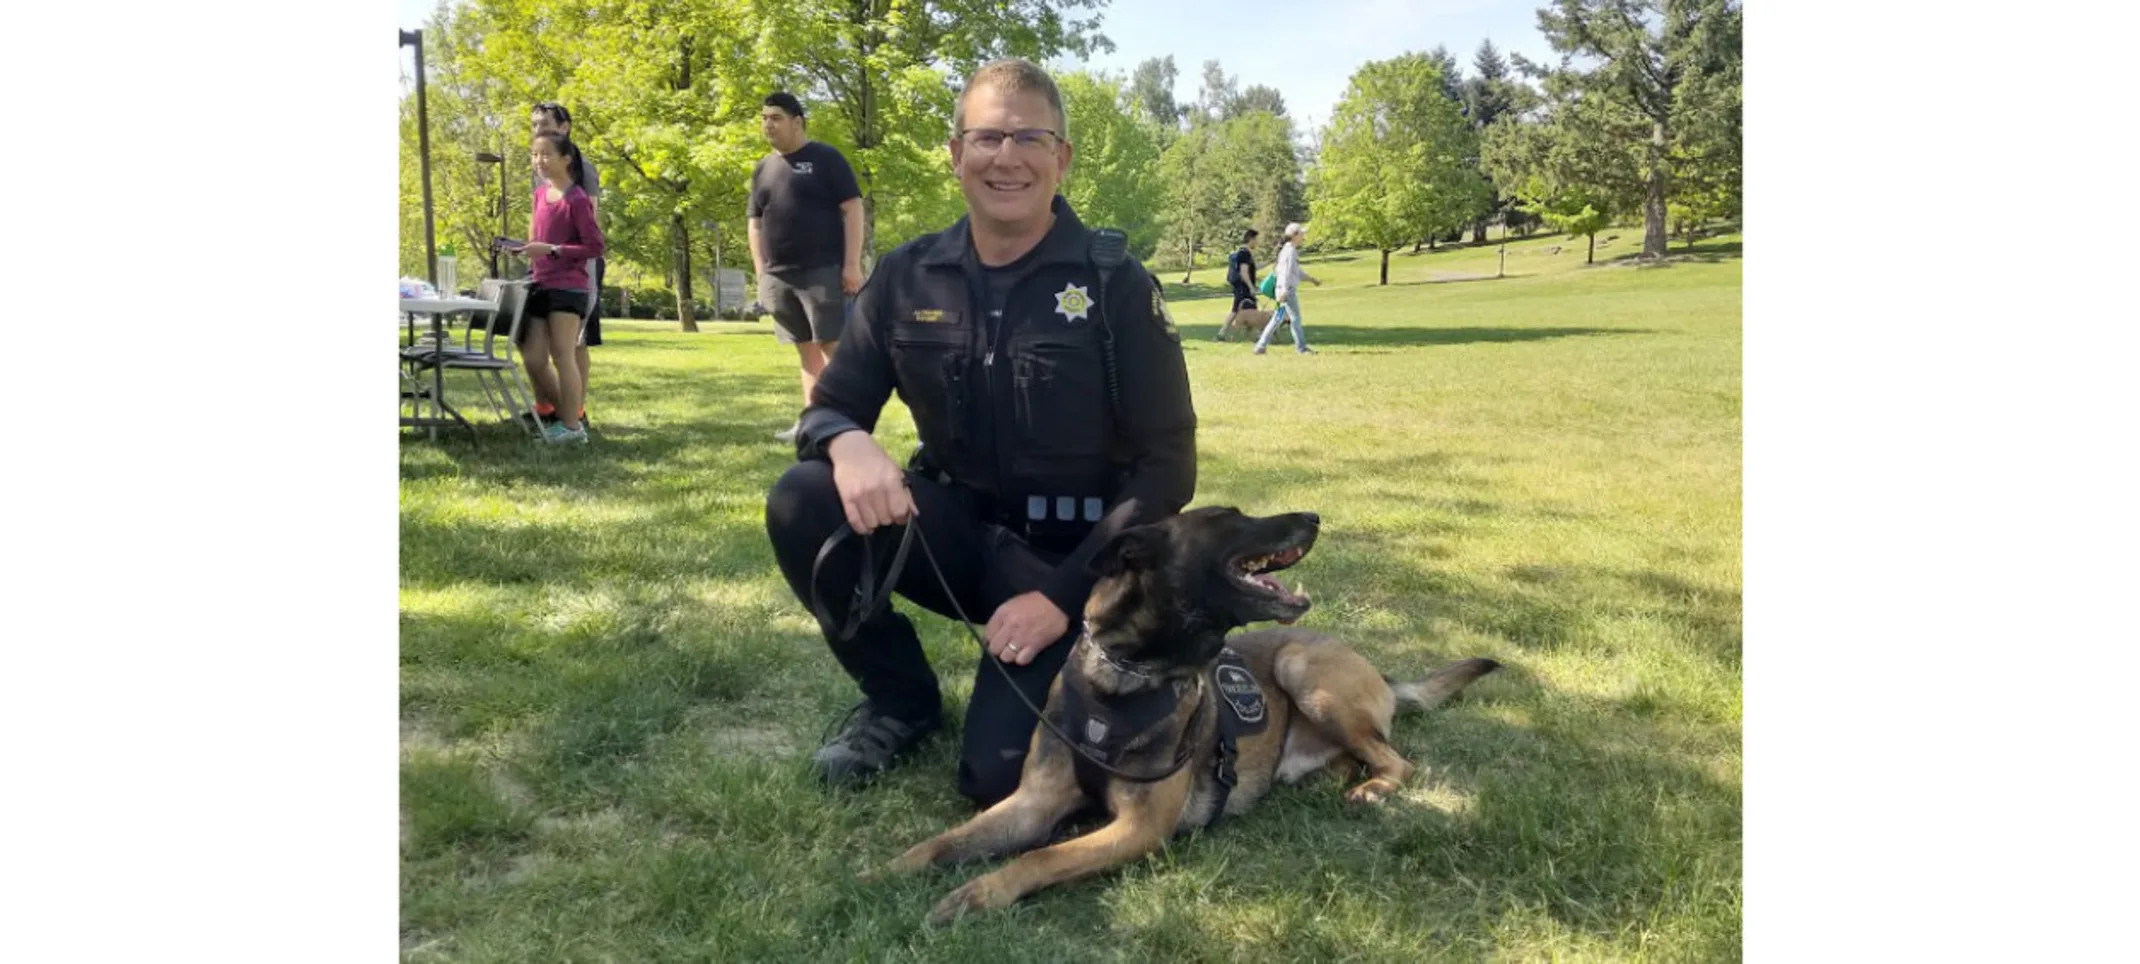 Officer smiling with a German Shephard.